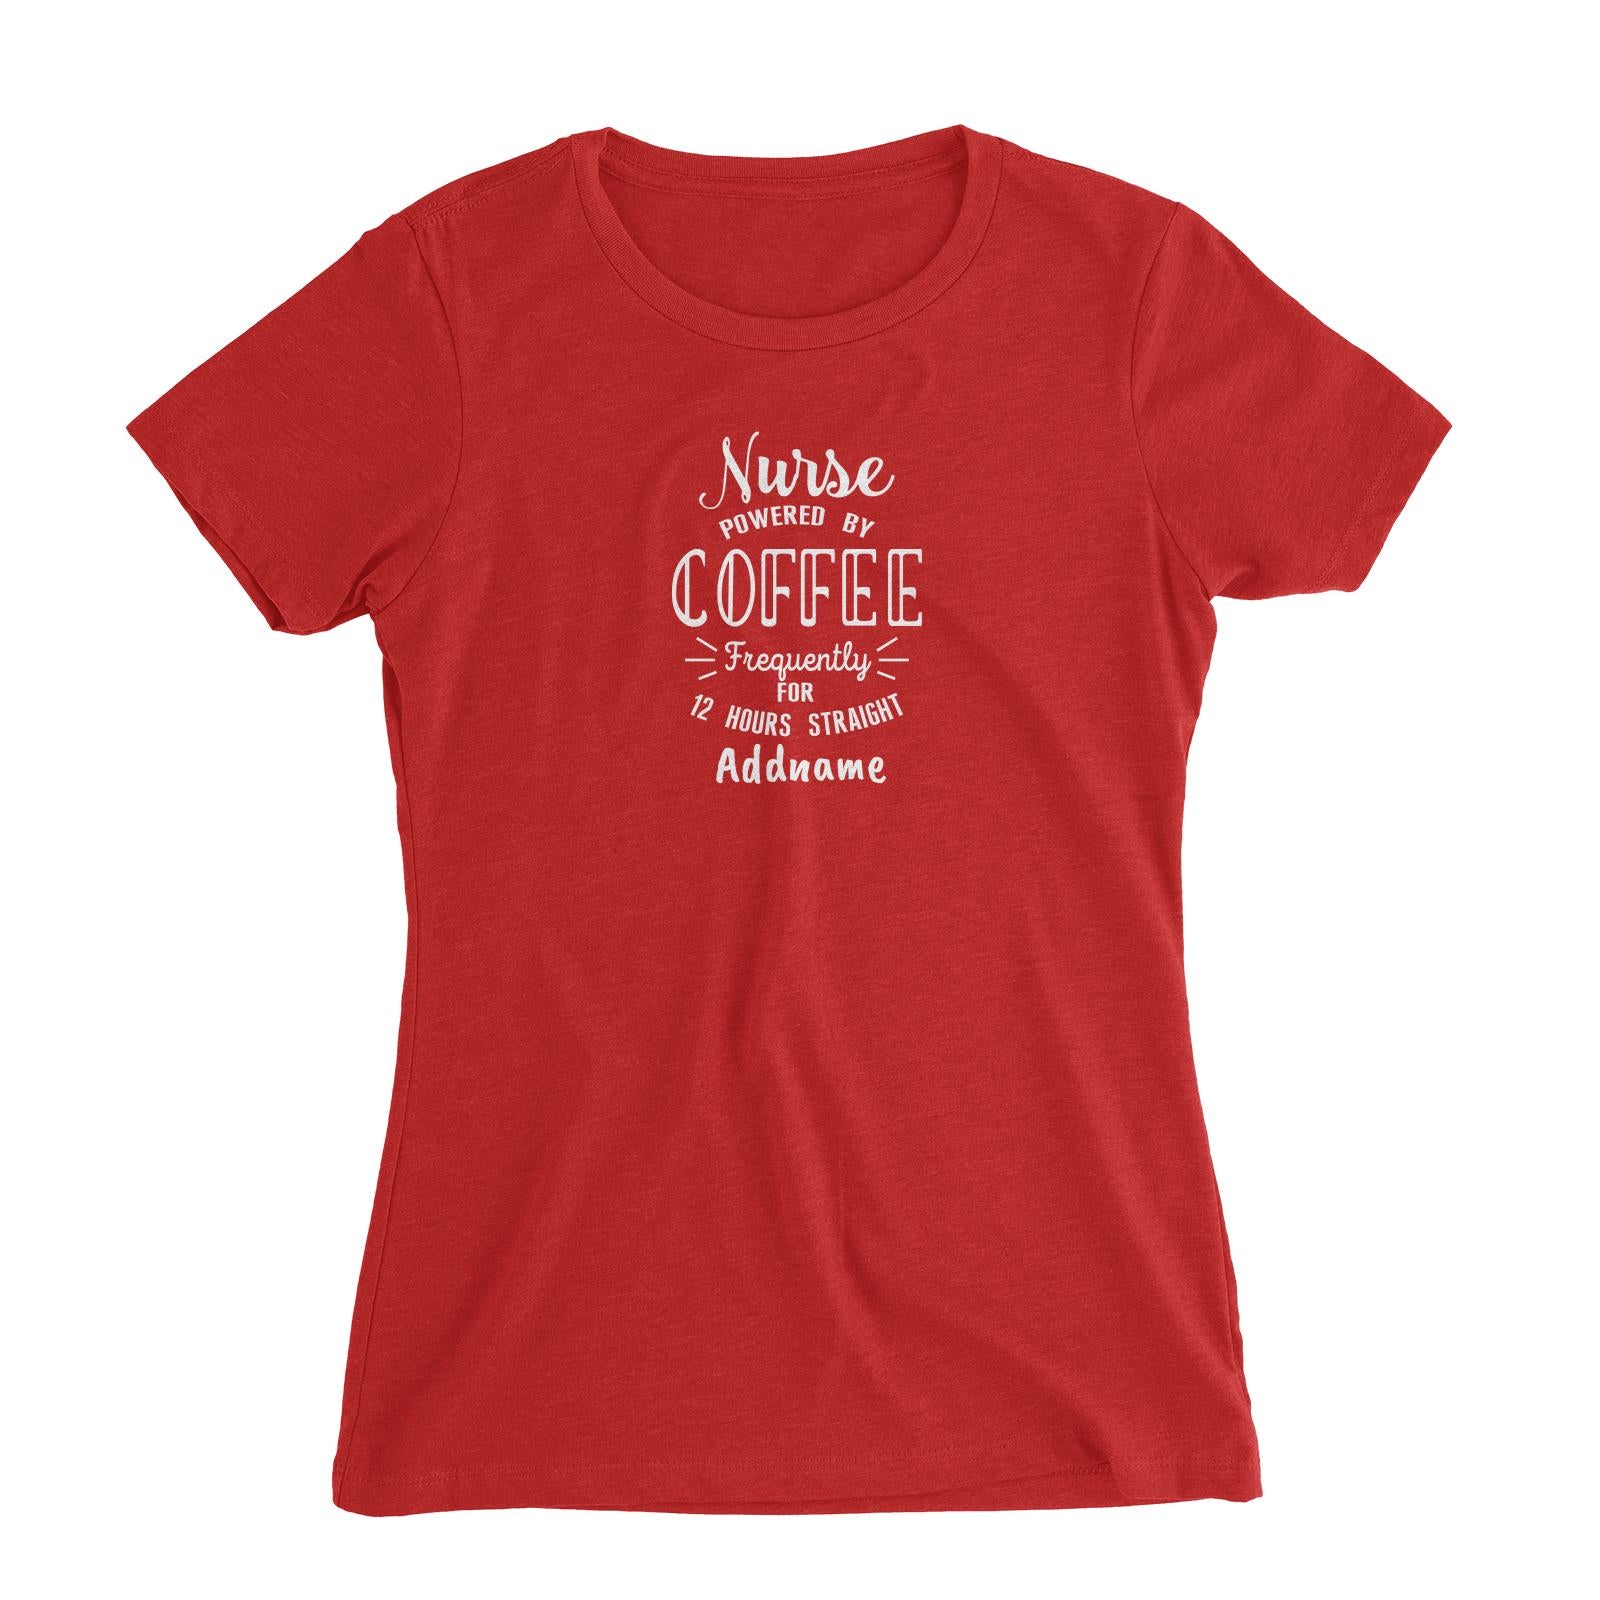 Nurse Powered By Coffee Frequently for 12 Hours Straight Women's Slim Fit T-Shirt